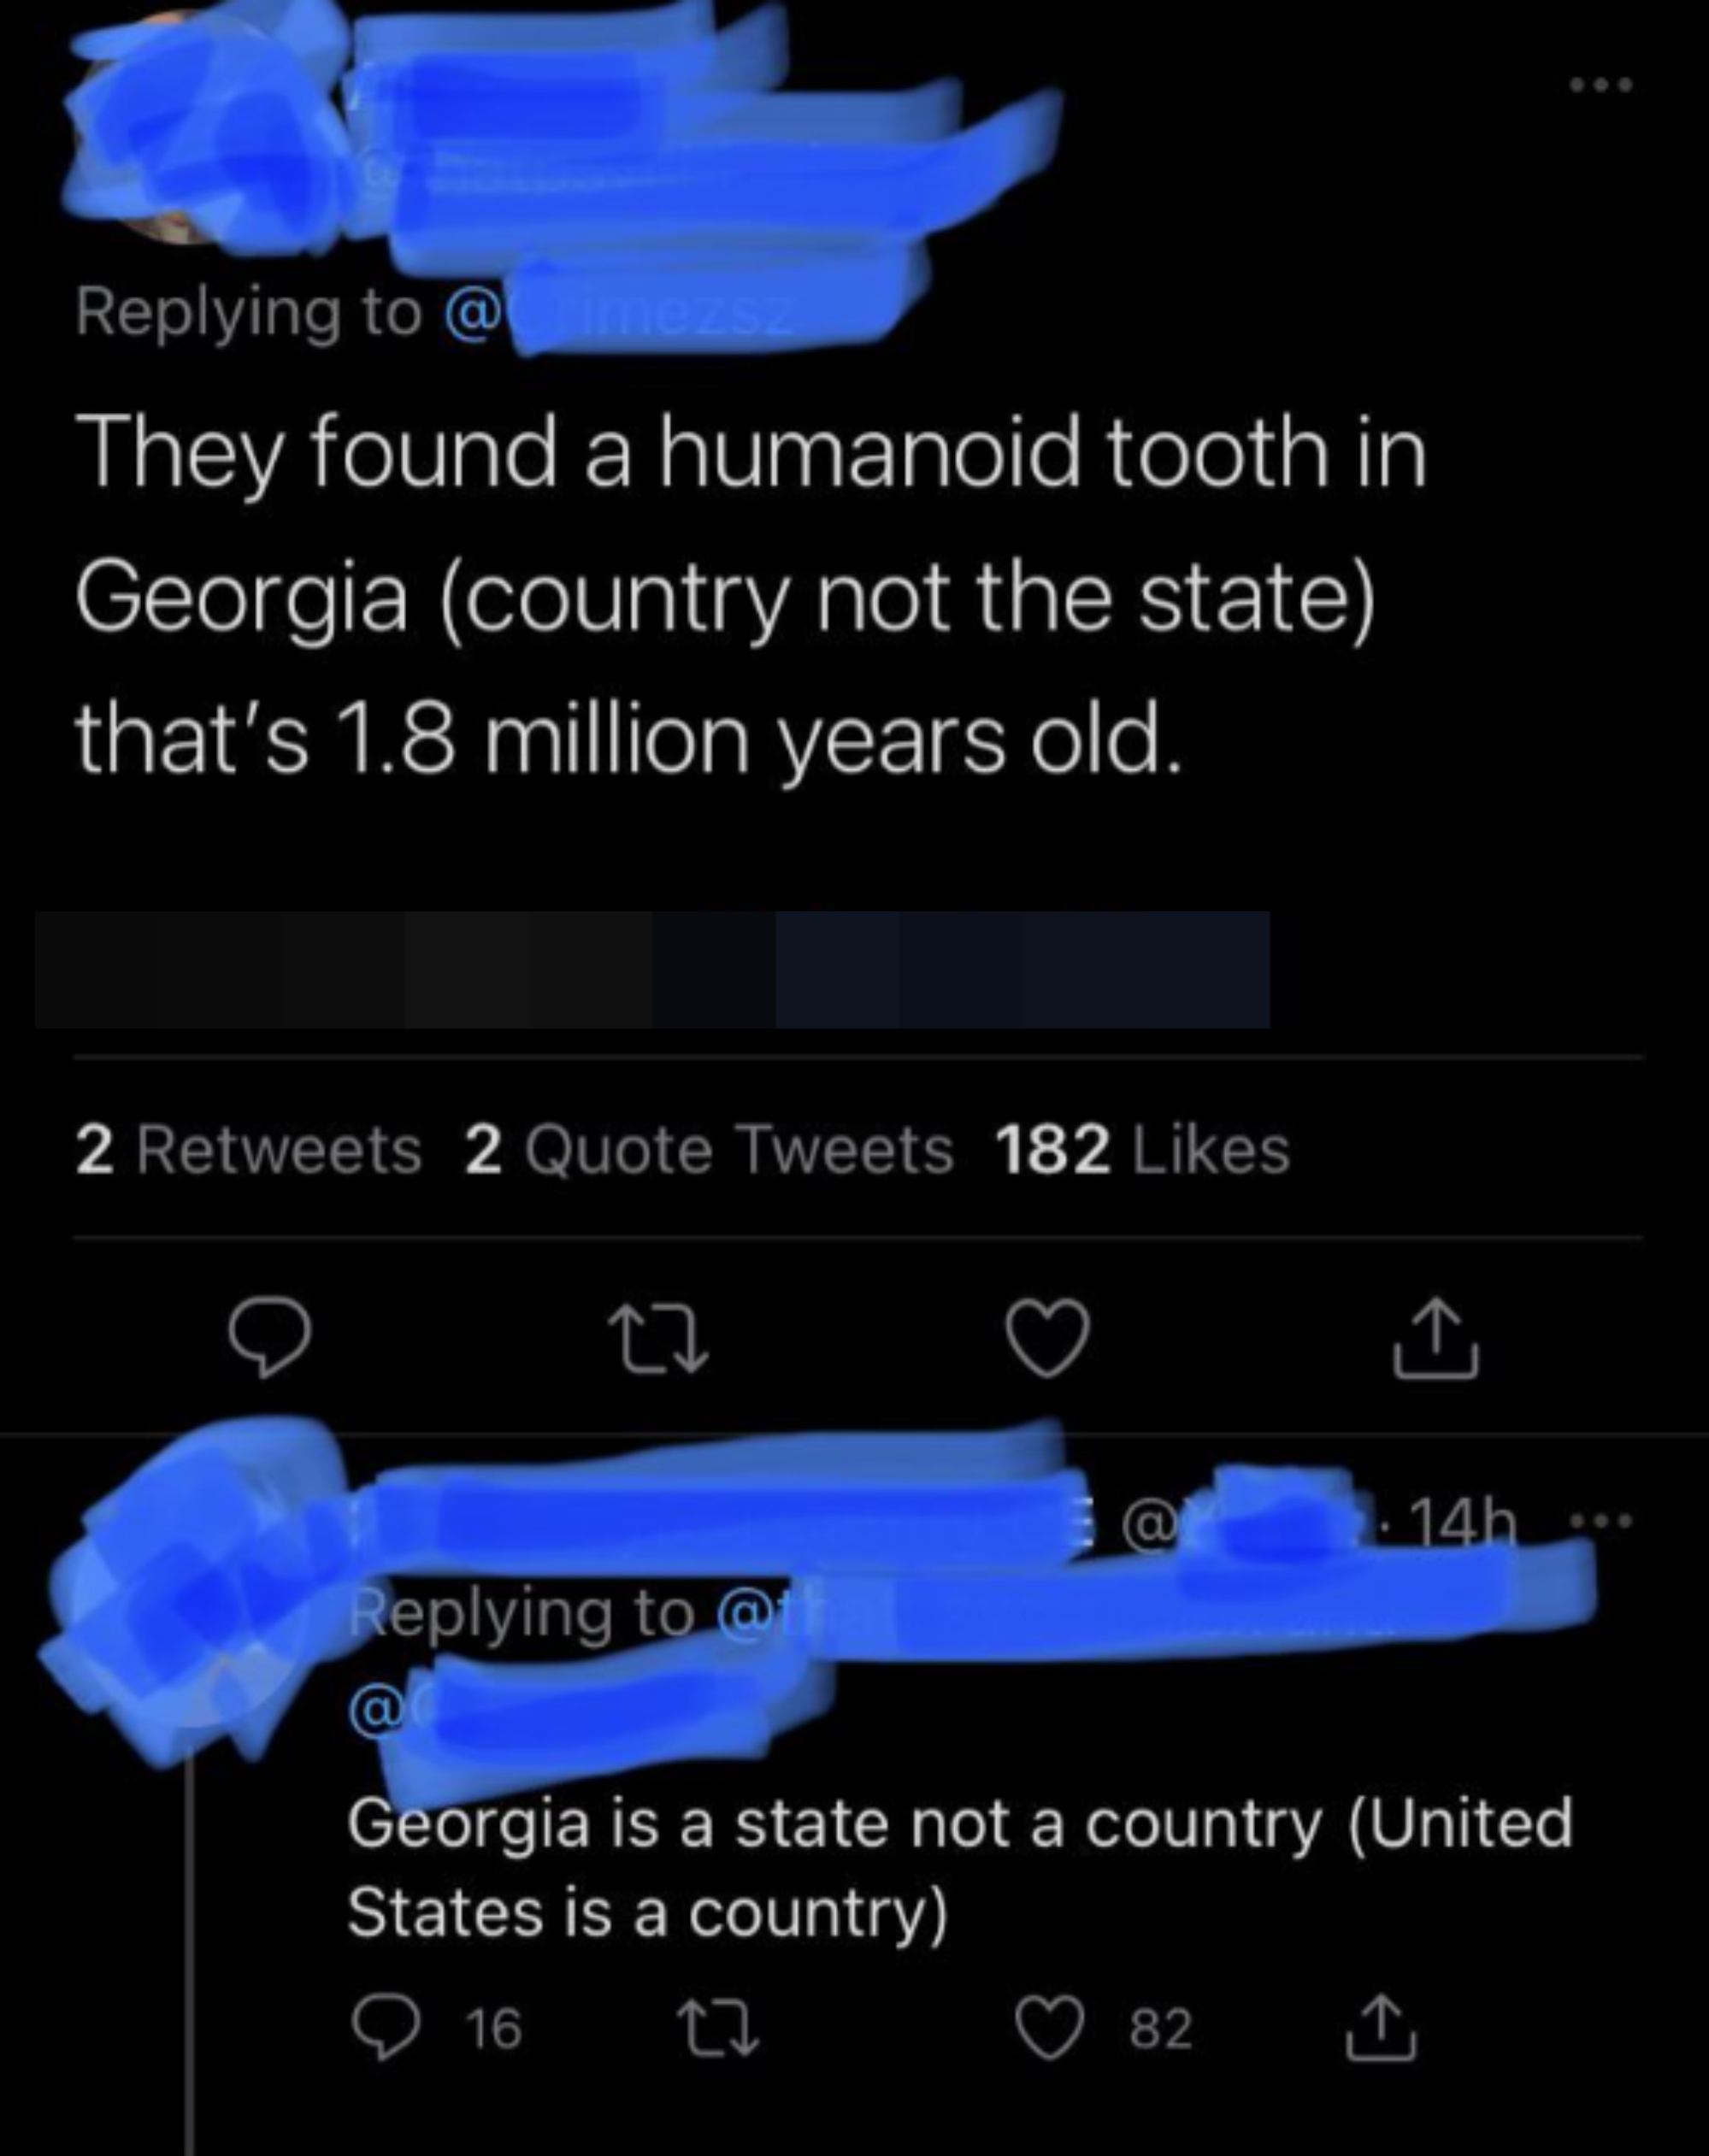 &quot;They found a humanoid tooth in Georgia (country not the state) that&#x27;s 1.8 million years old,&quot; response: &quot;Georgia is a state not a country (United States is a country)&quot;